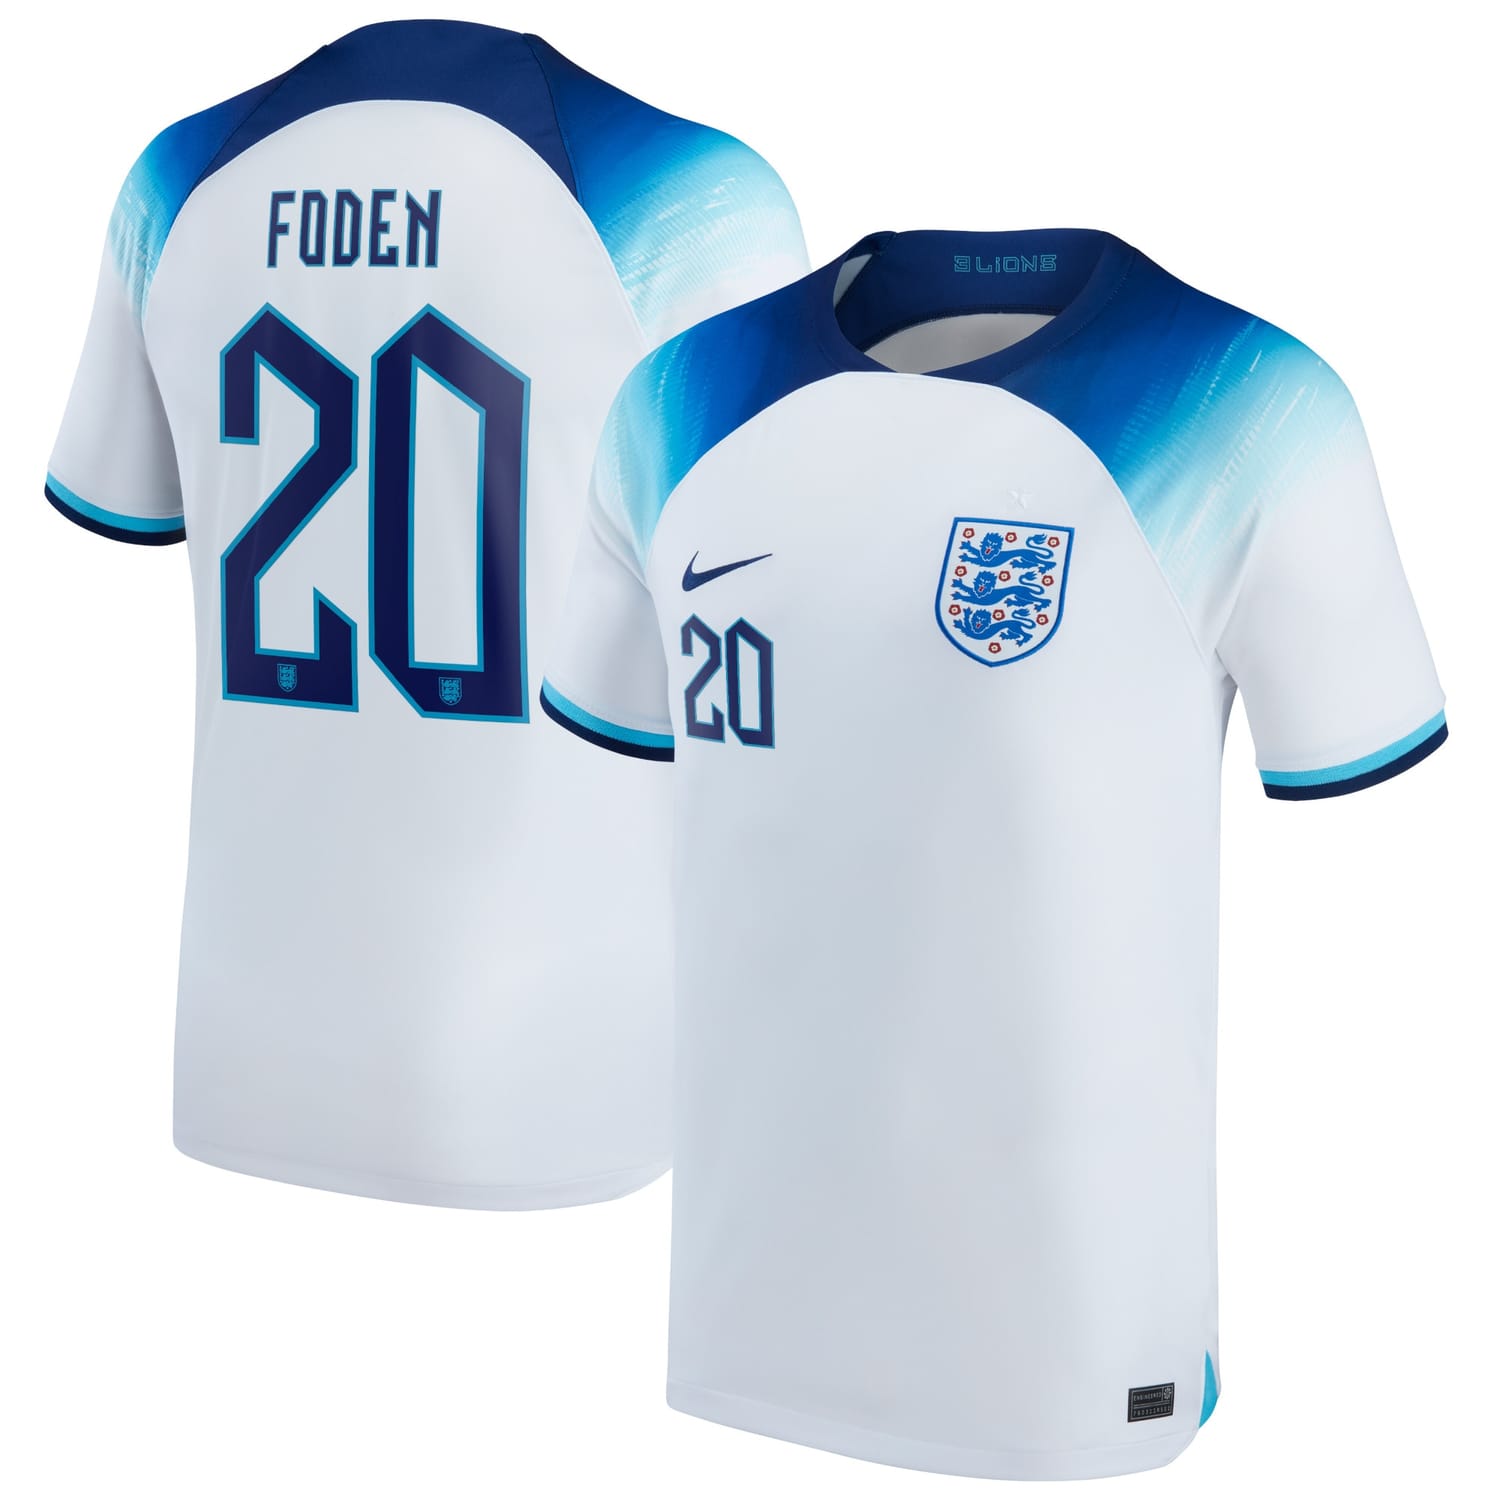 England National Team Home Jersey Shirt 2022 player Phil Foden 20 printing for Men